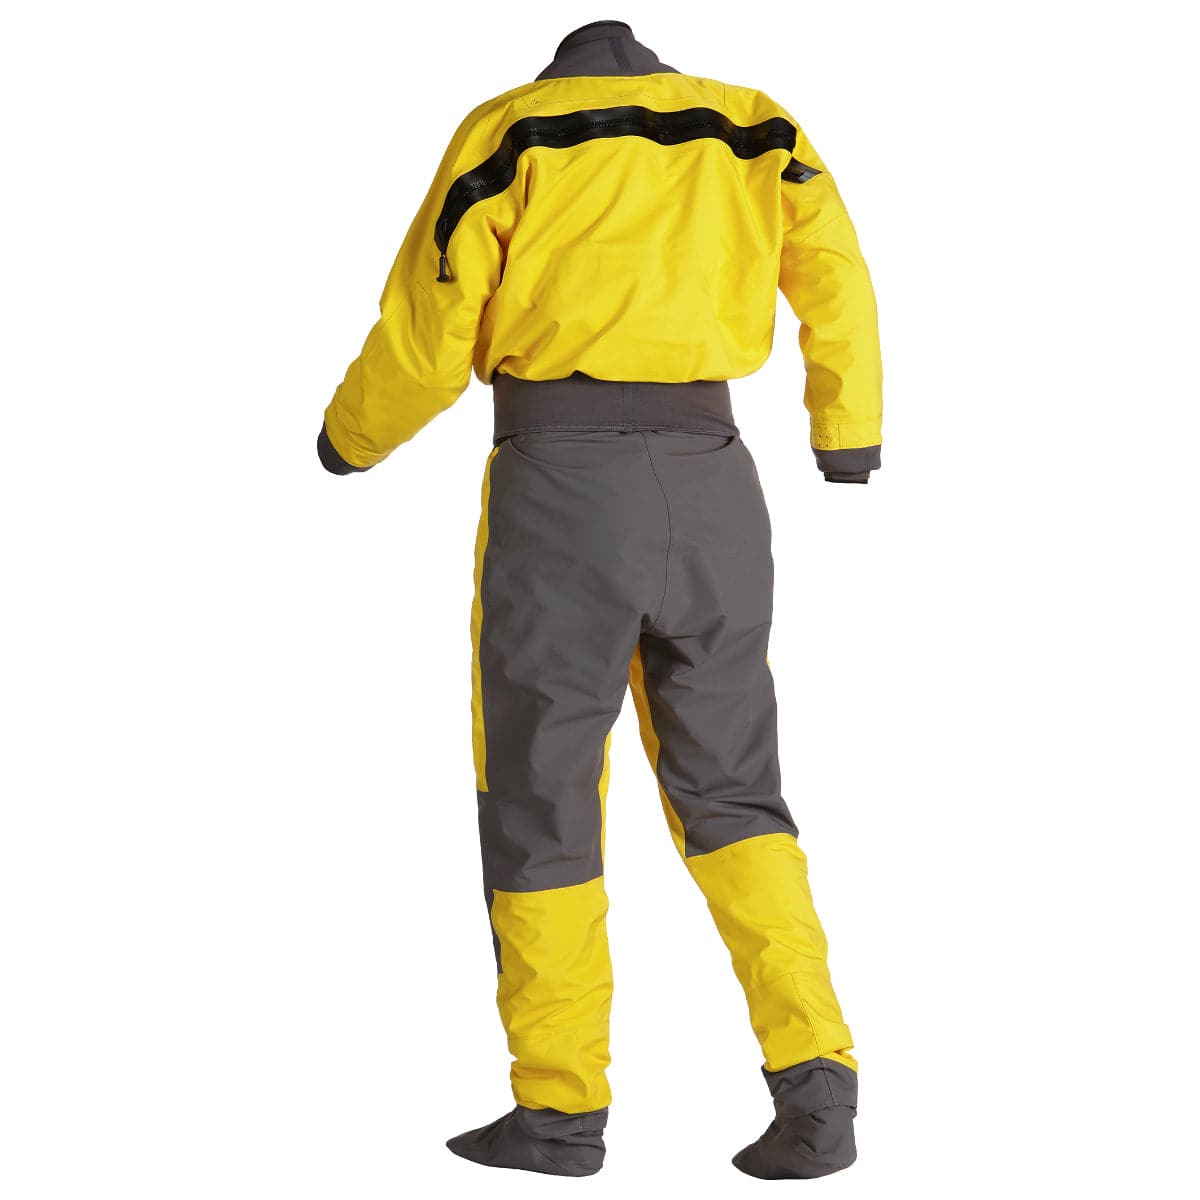 Featuring the 7Figure Drysuit drysuit, drysuits, men's dry wear manufactured by Immersion Research shown here from a second angle.